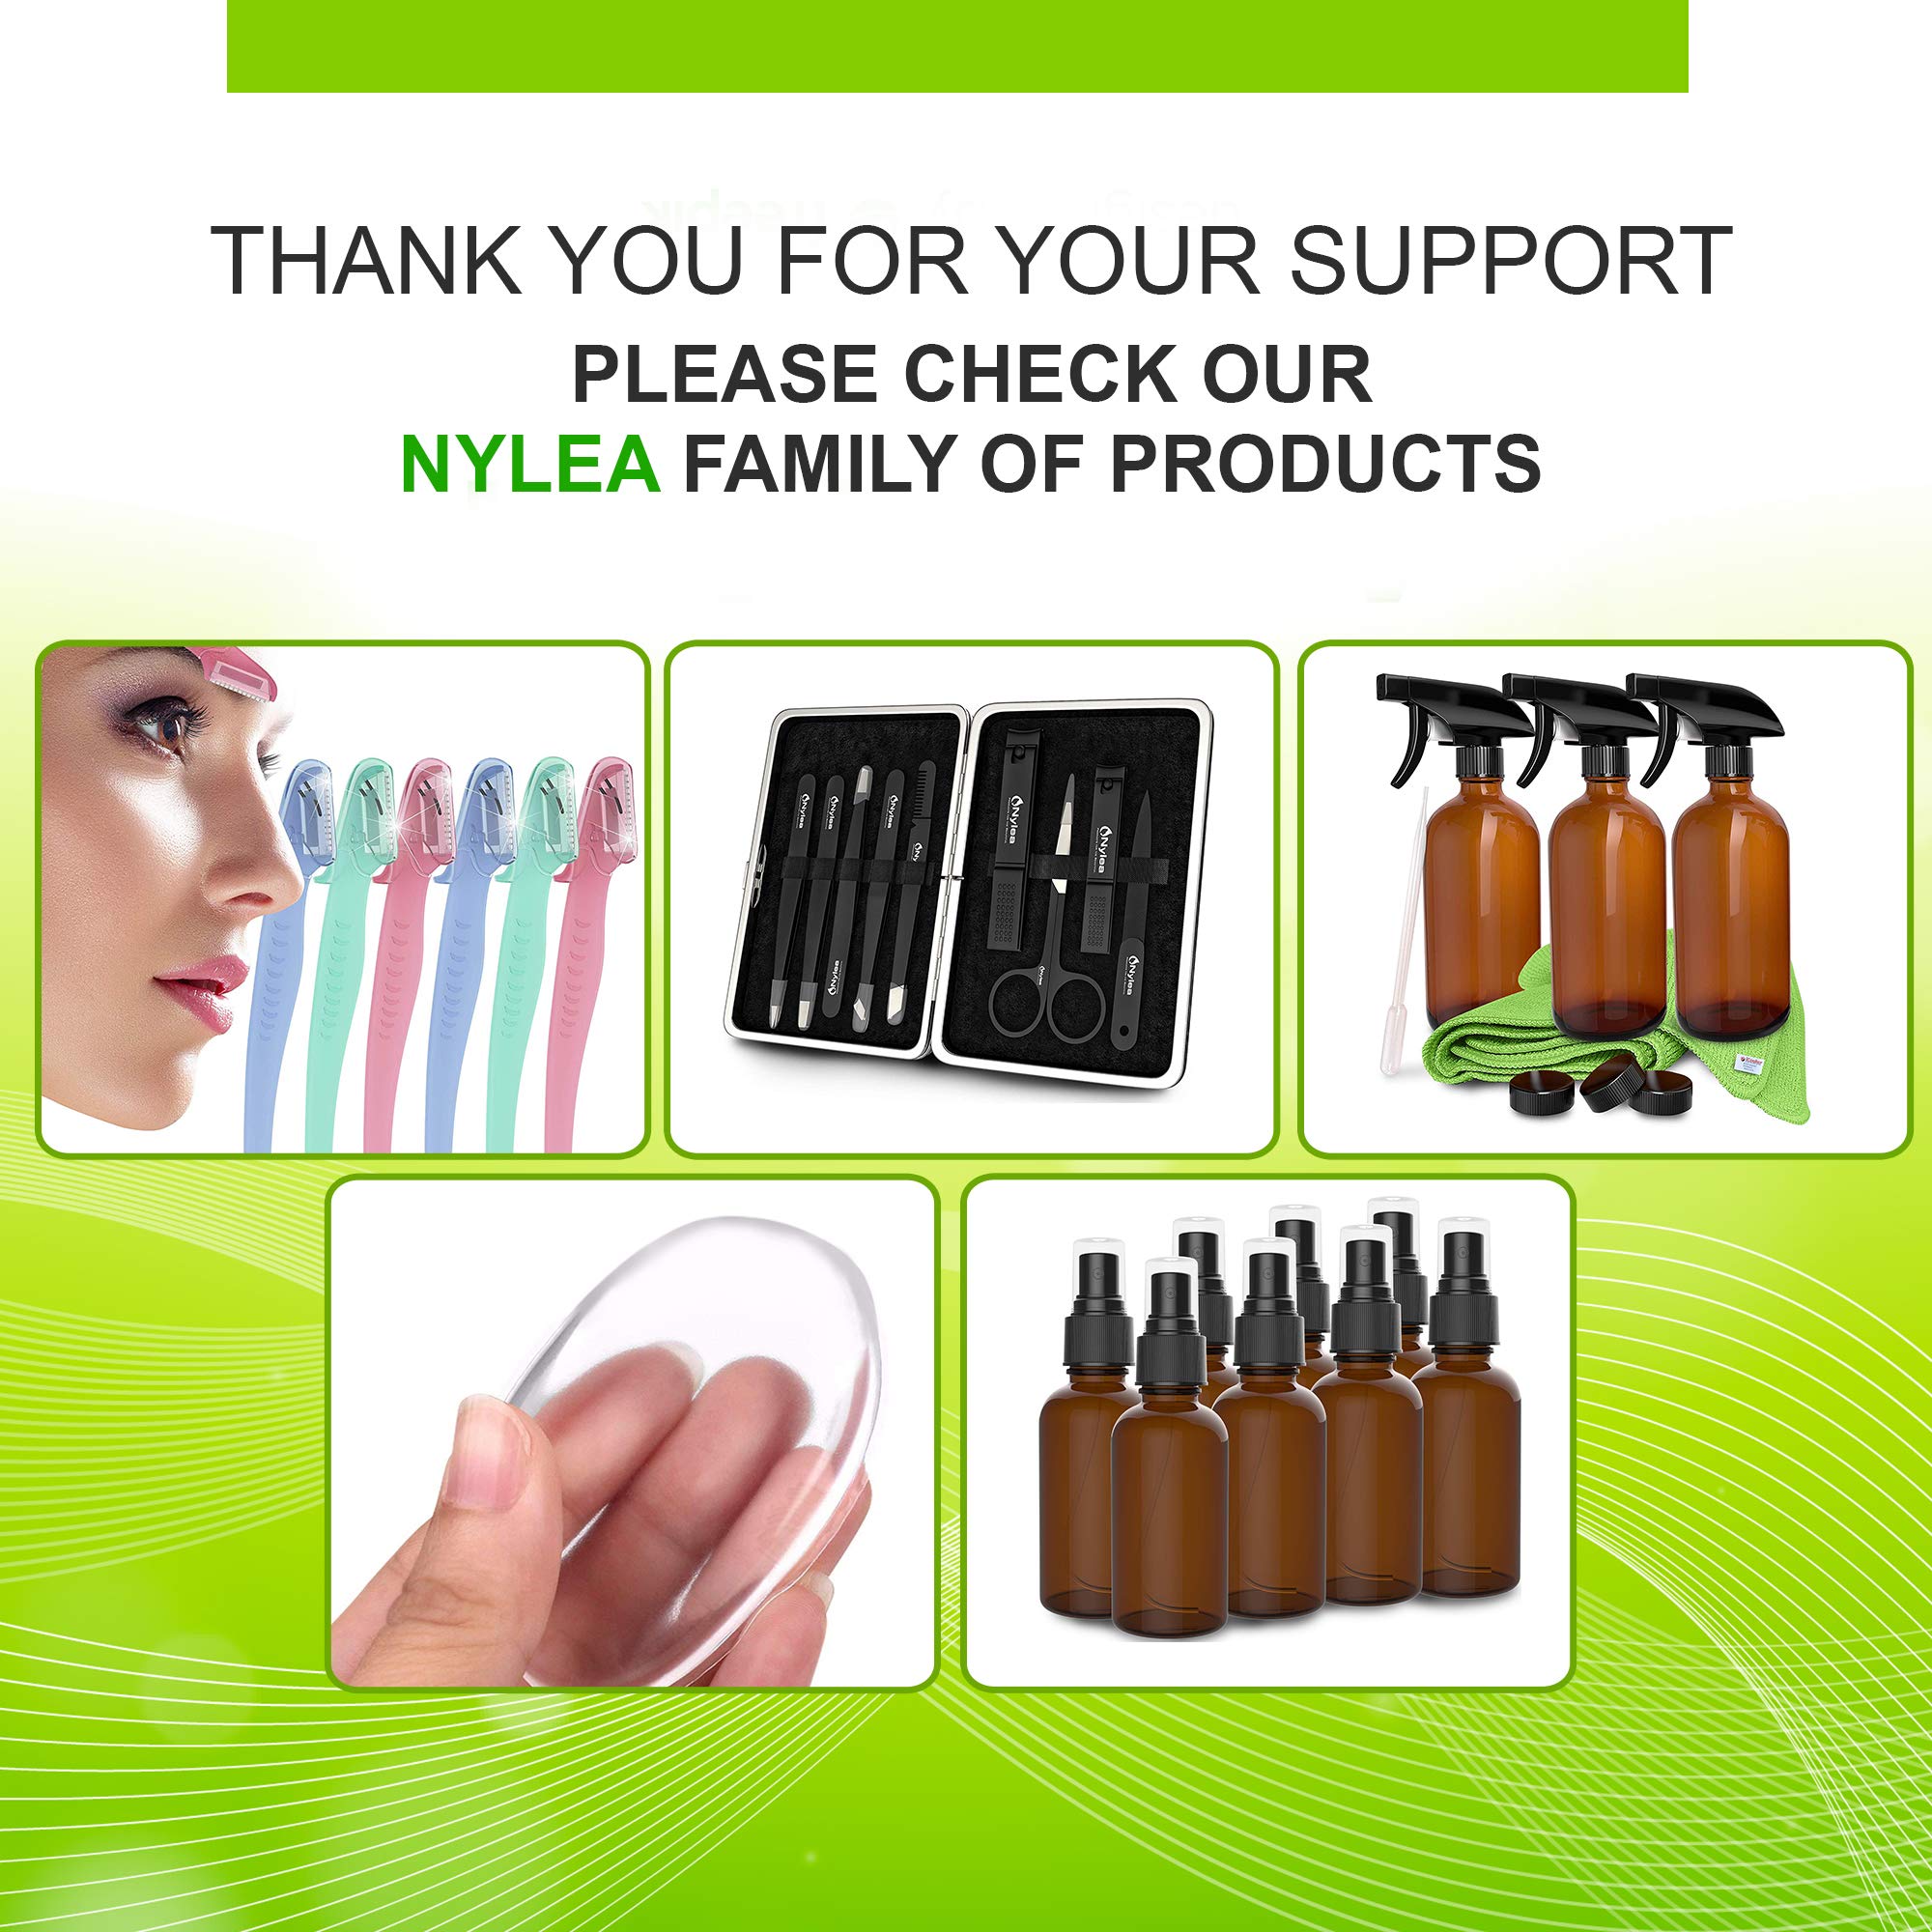 Nylea 8 Pack Amber Spray Bottles 2oz - [THE PERFECT SPRAY] - Empty Glass Bottles For Cleaning Solutions - Best Refillable MIST SPRAY Pack Perfume Atomizer [2oz]